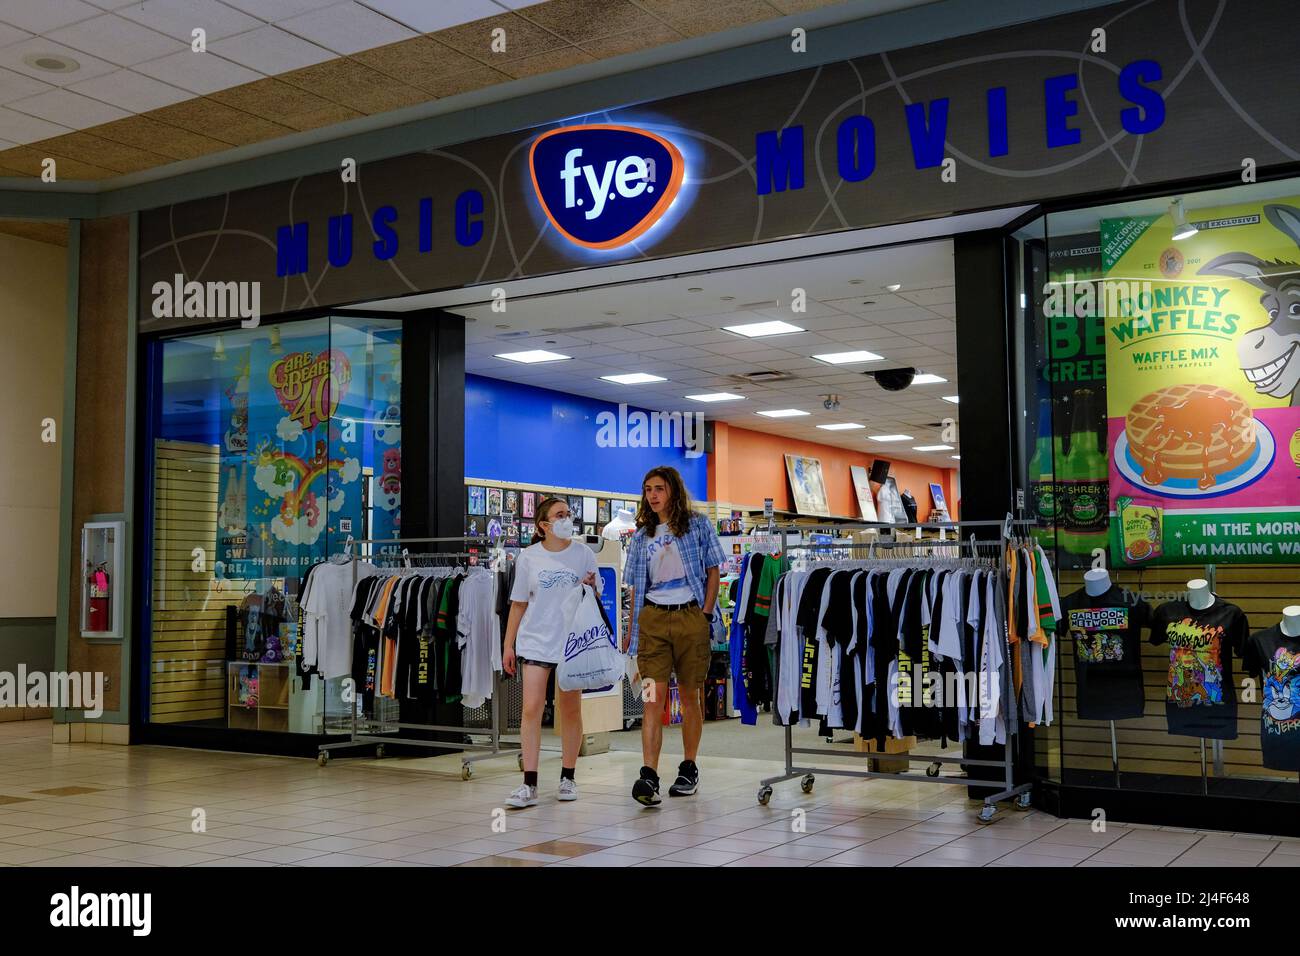 Selinsgrove, United States. 14th Apr, 2022. Shoppers exit an f.y.e. store inside the Susquehanna Valley Mall near Selinsgrove, Pennsylvania, on April 14, 2022. (Photo by Paul Weaver/Sipa USA) Credit: Sipa USA/Alamy Live News Stock Photo